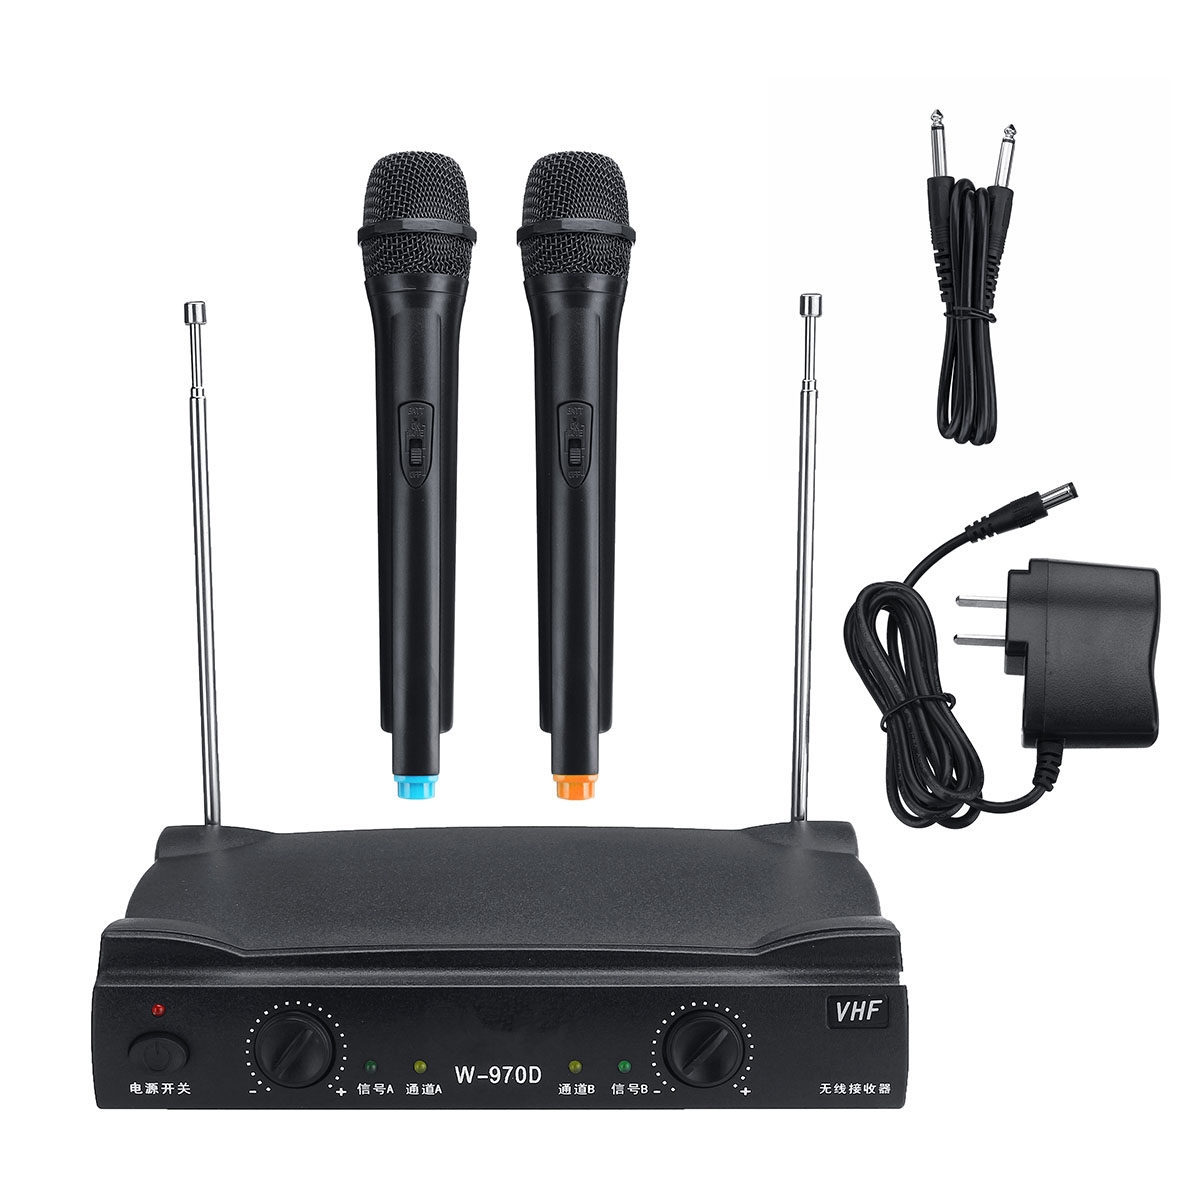 COK-W-970D-VHF-Wireless-Handheld-Microphone-System-for-Stage-KTV-Speech-Meeting-1639898